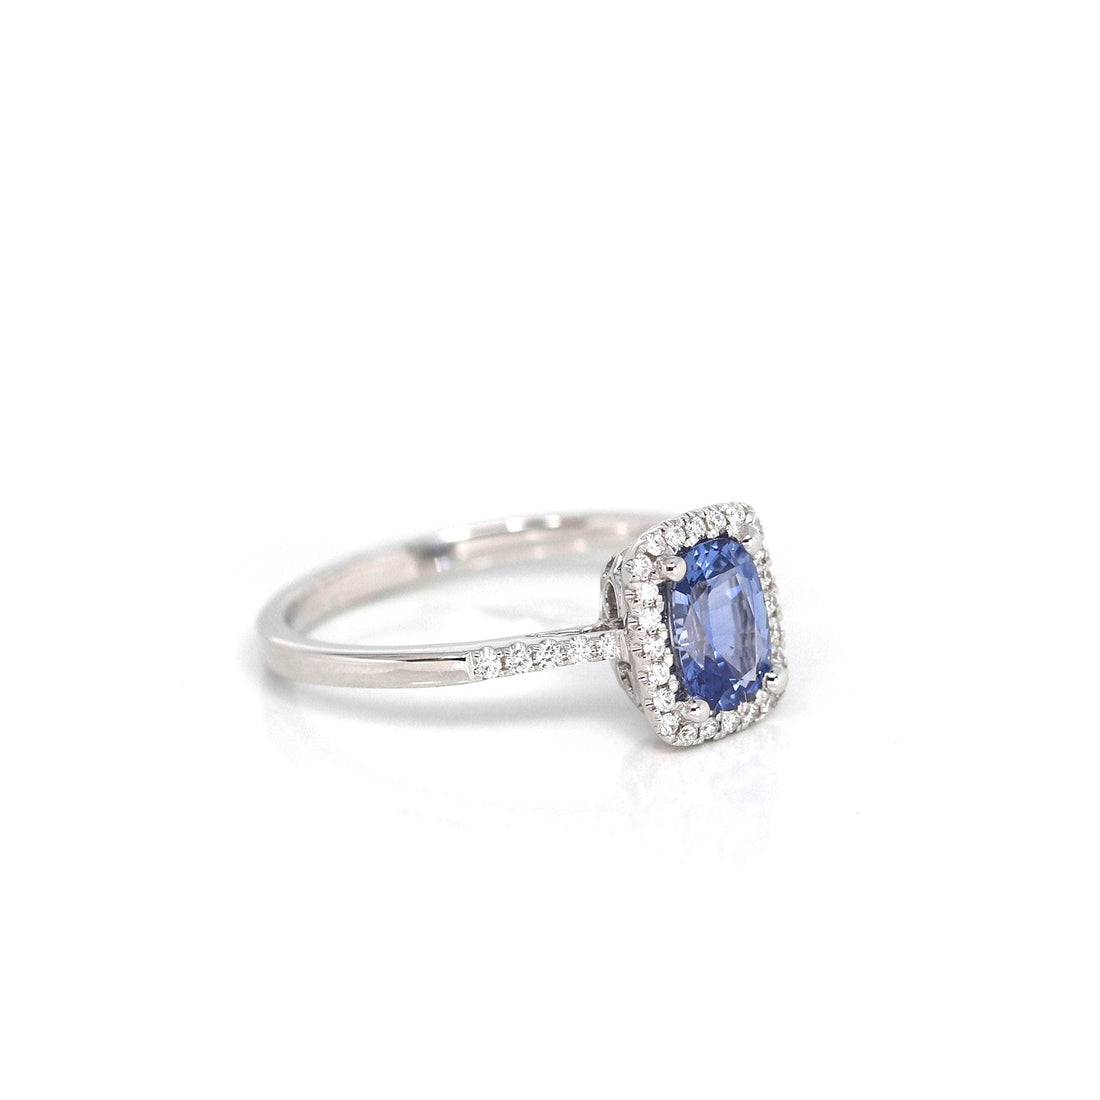 Baikalla Jewelry Gold Sapphire Ring 14k White Gold Natural Blue Sapphire Ring with Diamonds